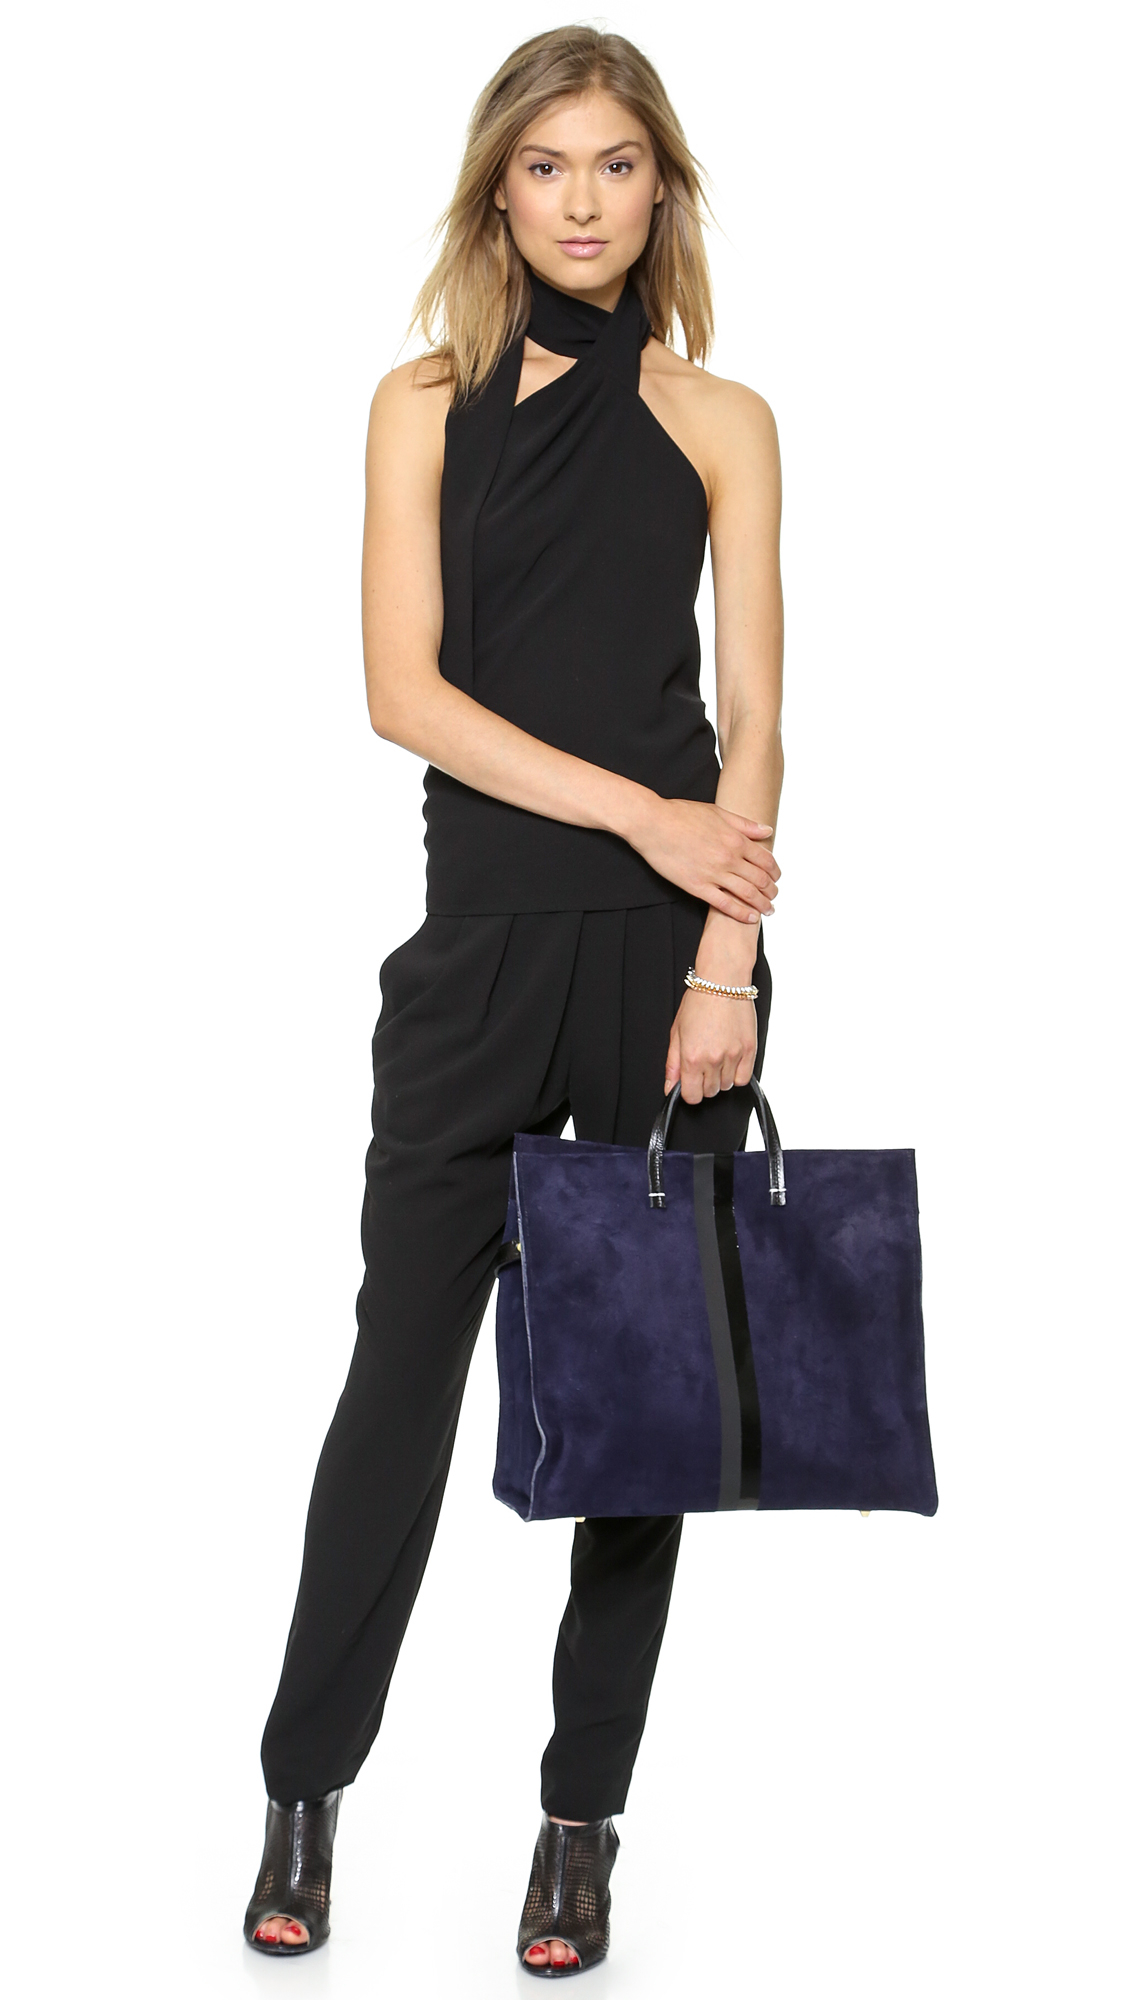 Clare V. Simple Tote - Navy Suede With Black in Blue